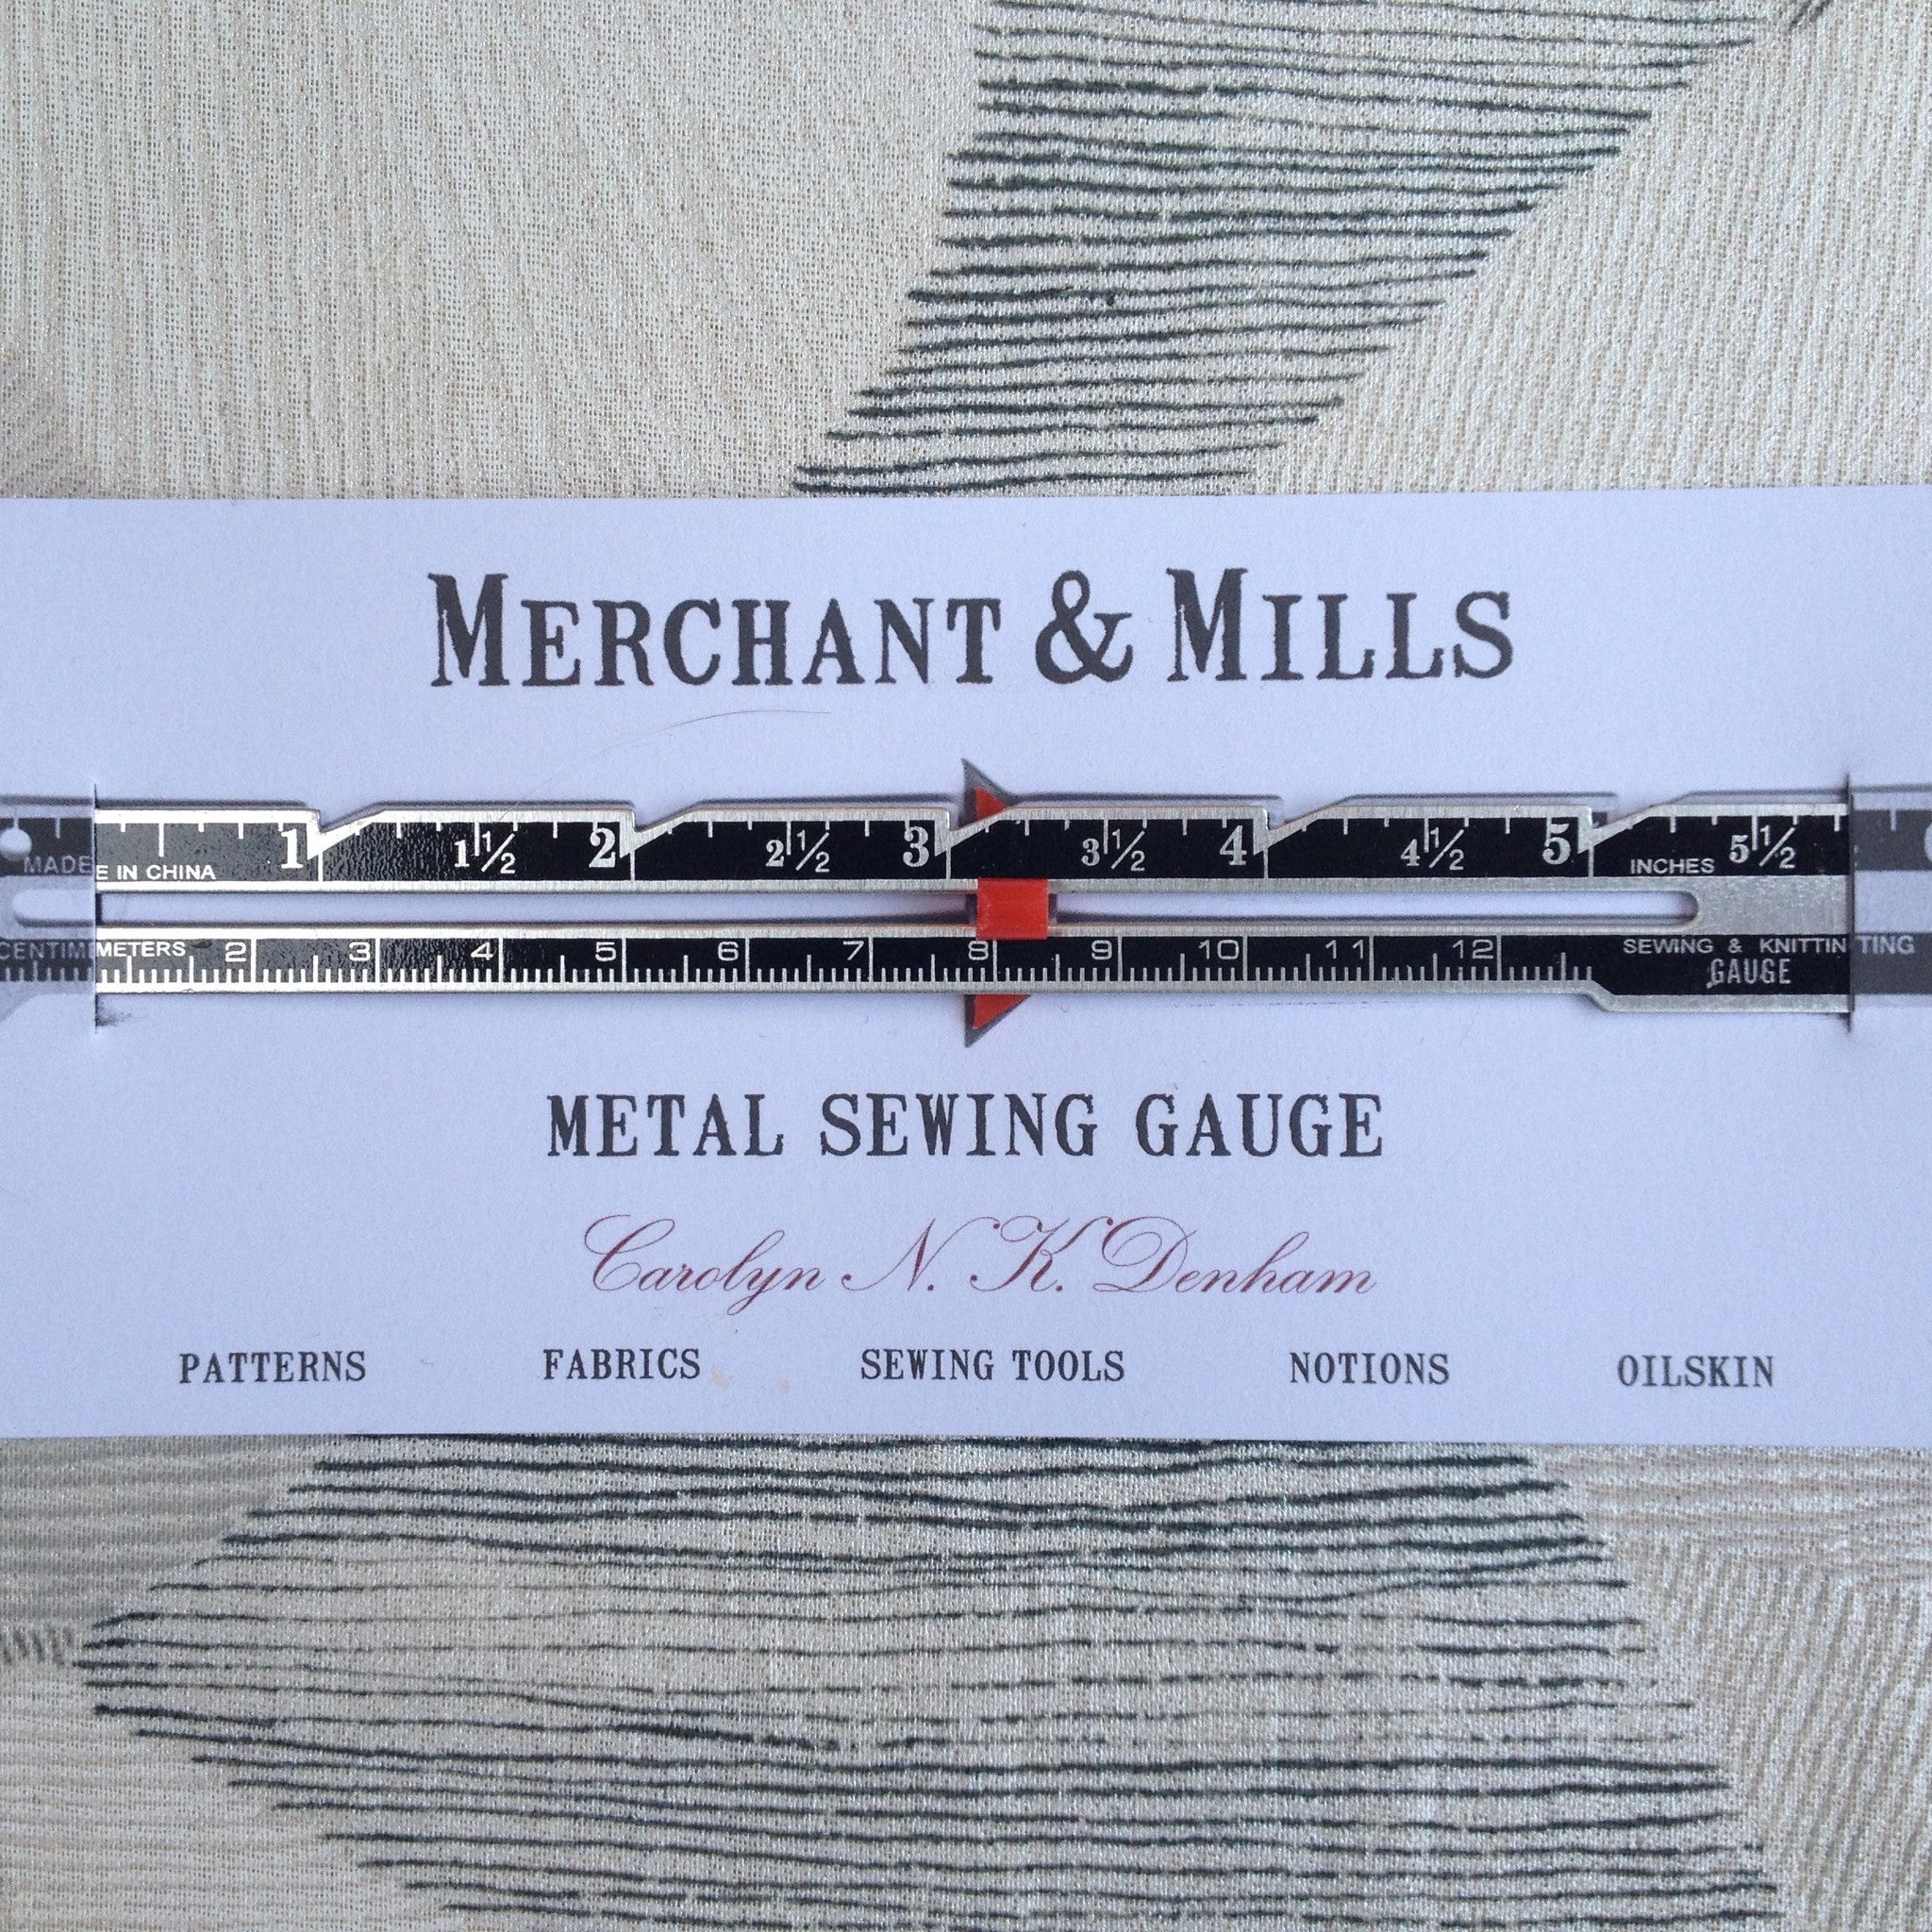 Redesign Your Product Line With Wholesale sewing gauge 